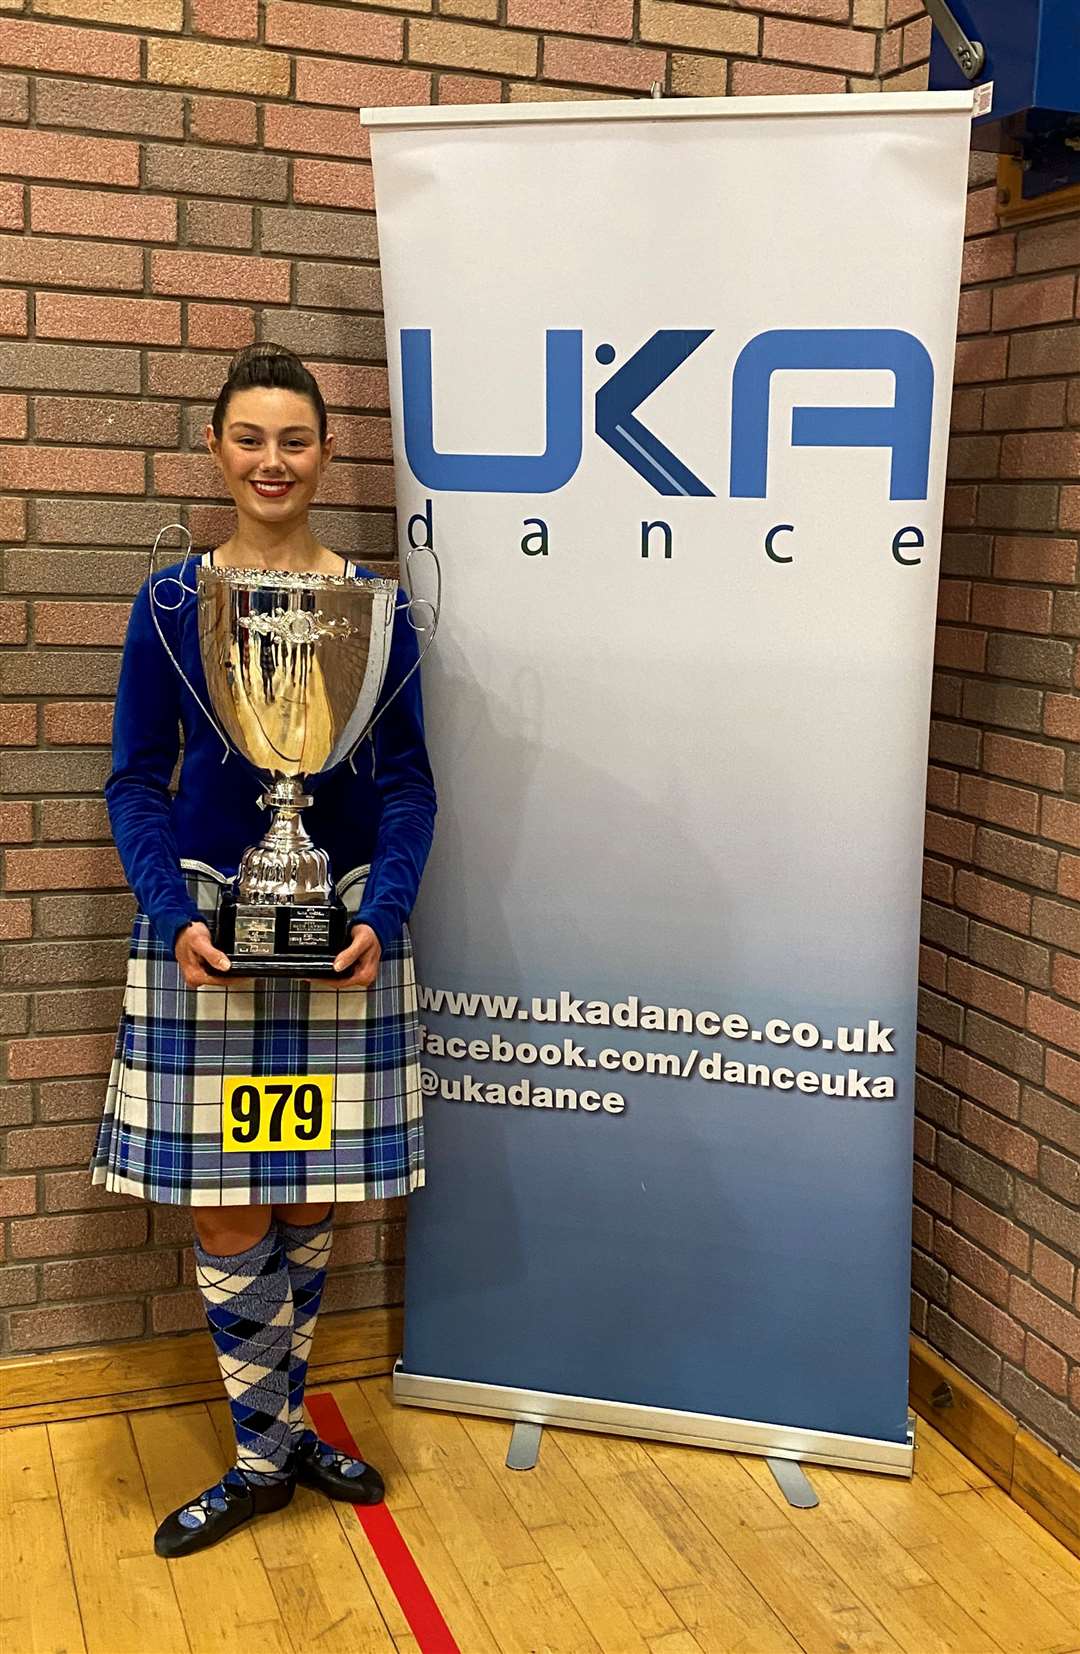 Lily with her giant UKA championships trophy won in Edinburgh this month